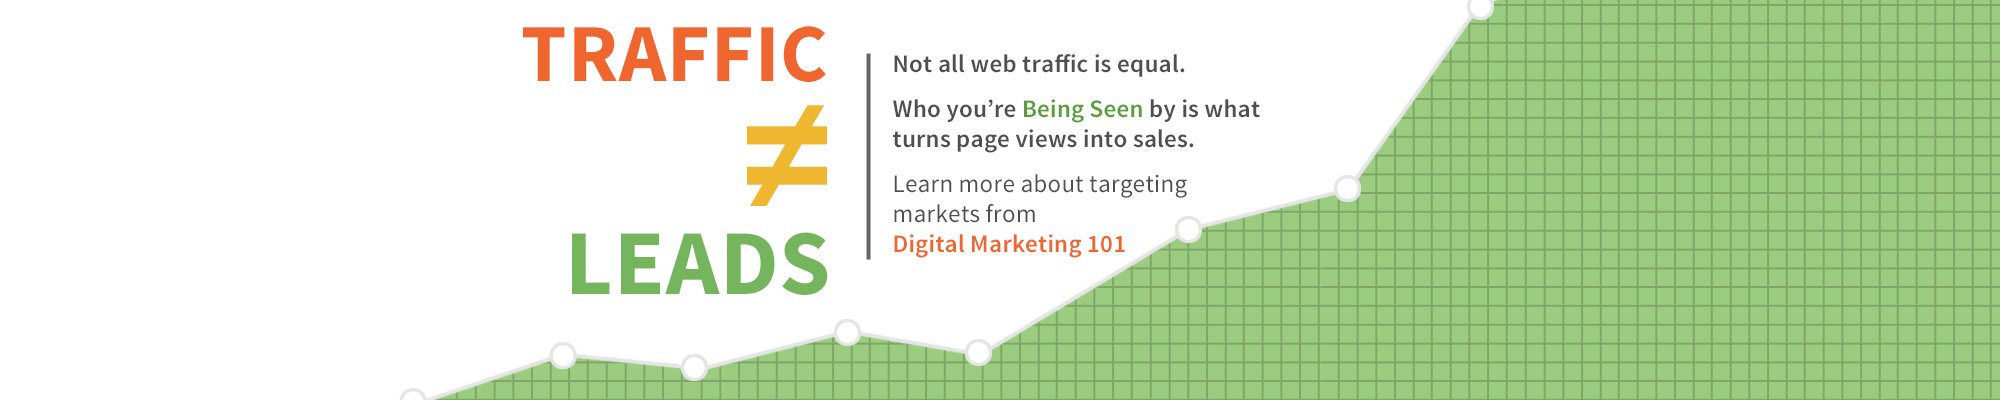 Page traffic doesn't equal leads or sales.